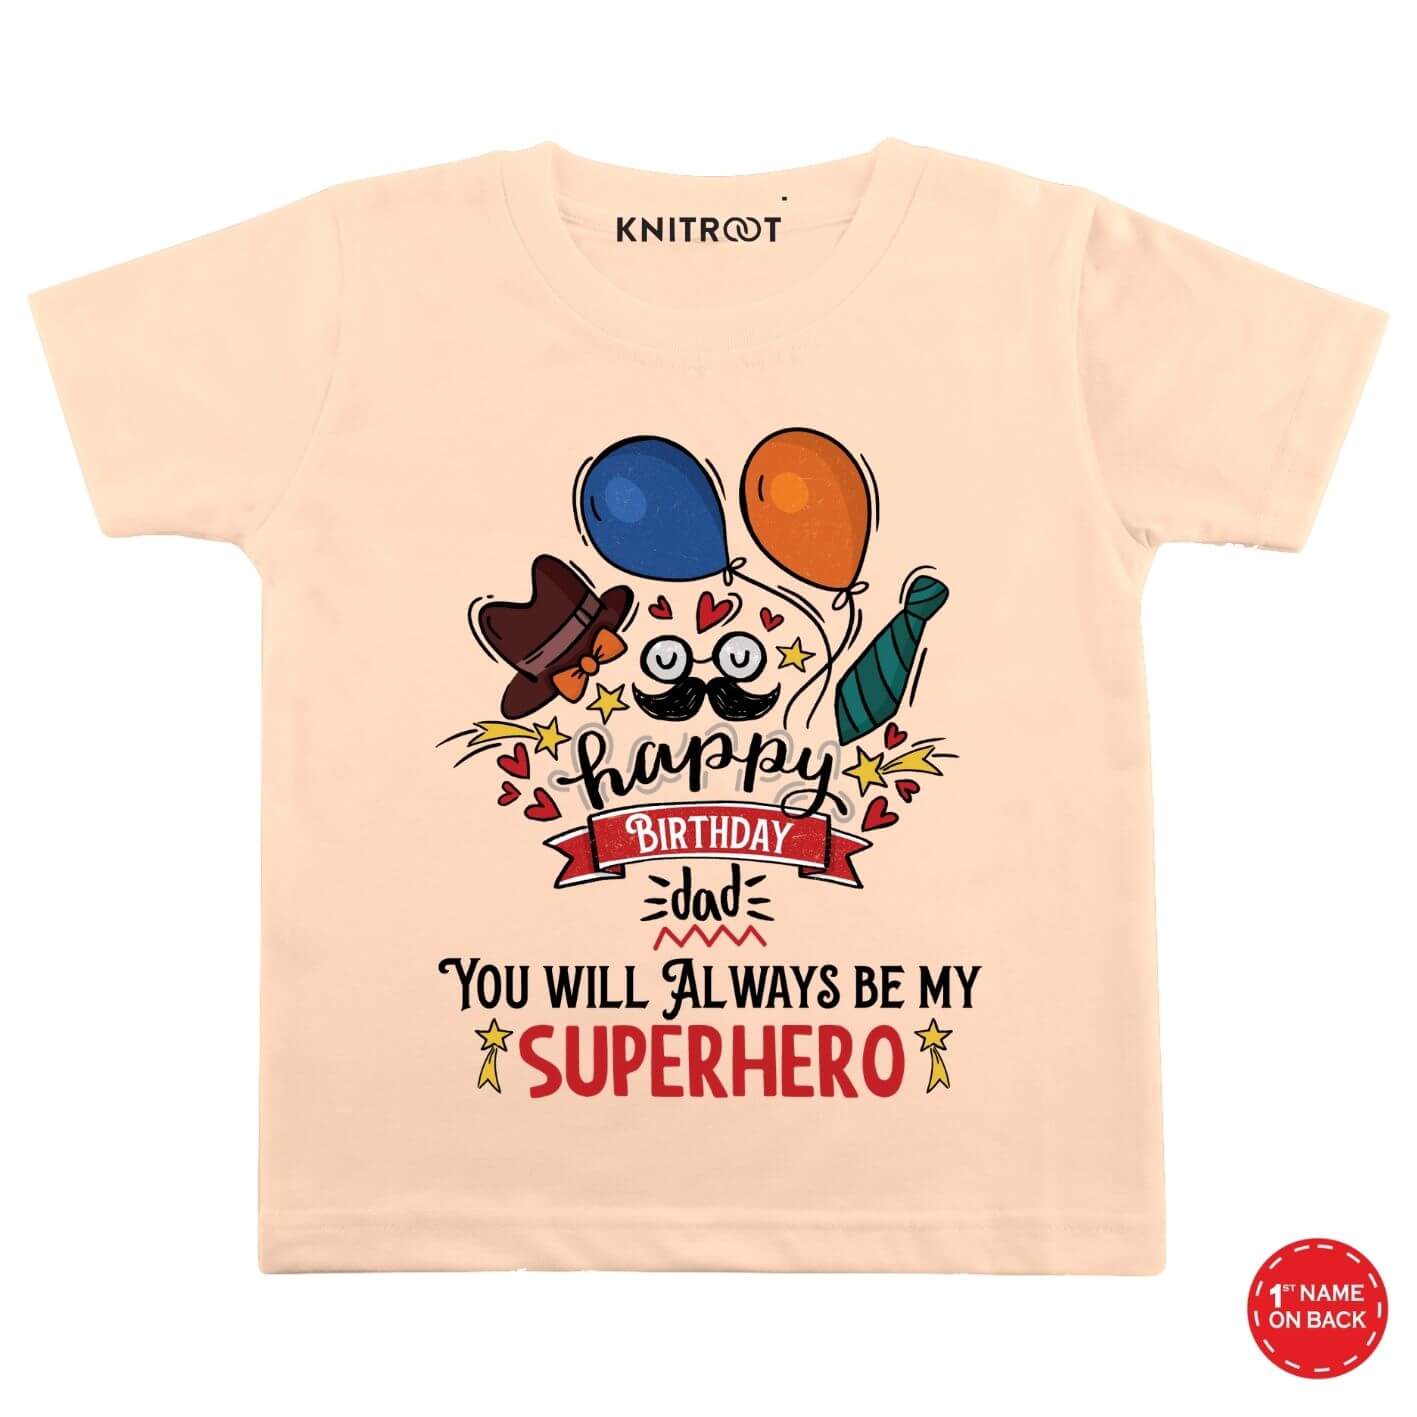 My Superhero T shirt/Onesie/Romper Outfits | Special Birthday | KNITROOT